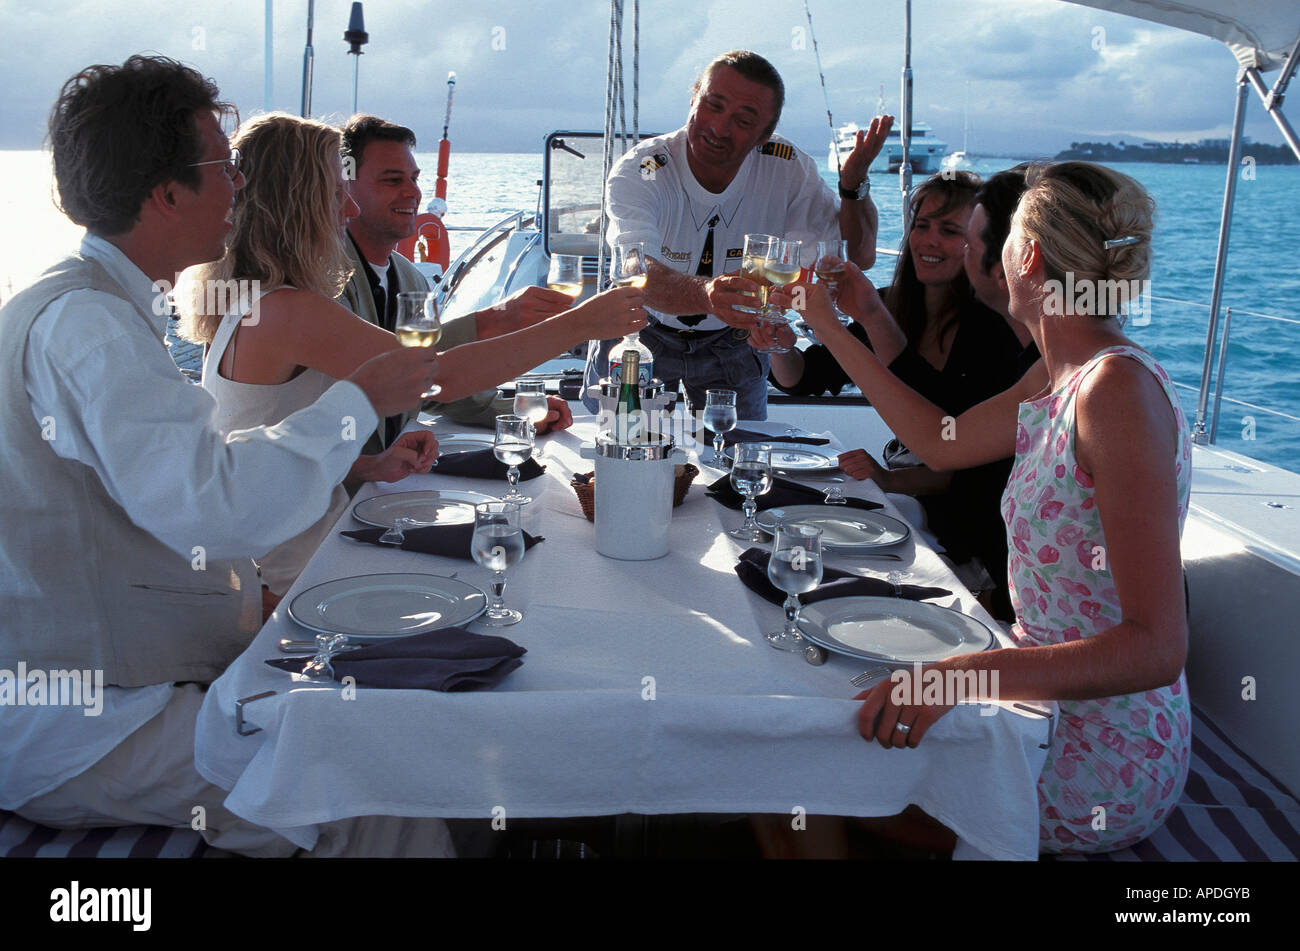 Lunch on sailing boat, Caribbean Sea Stock Photo